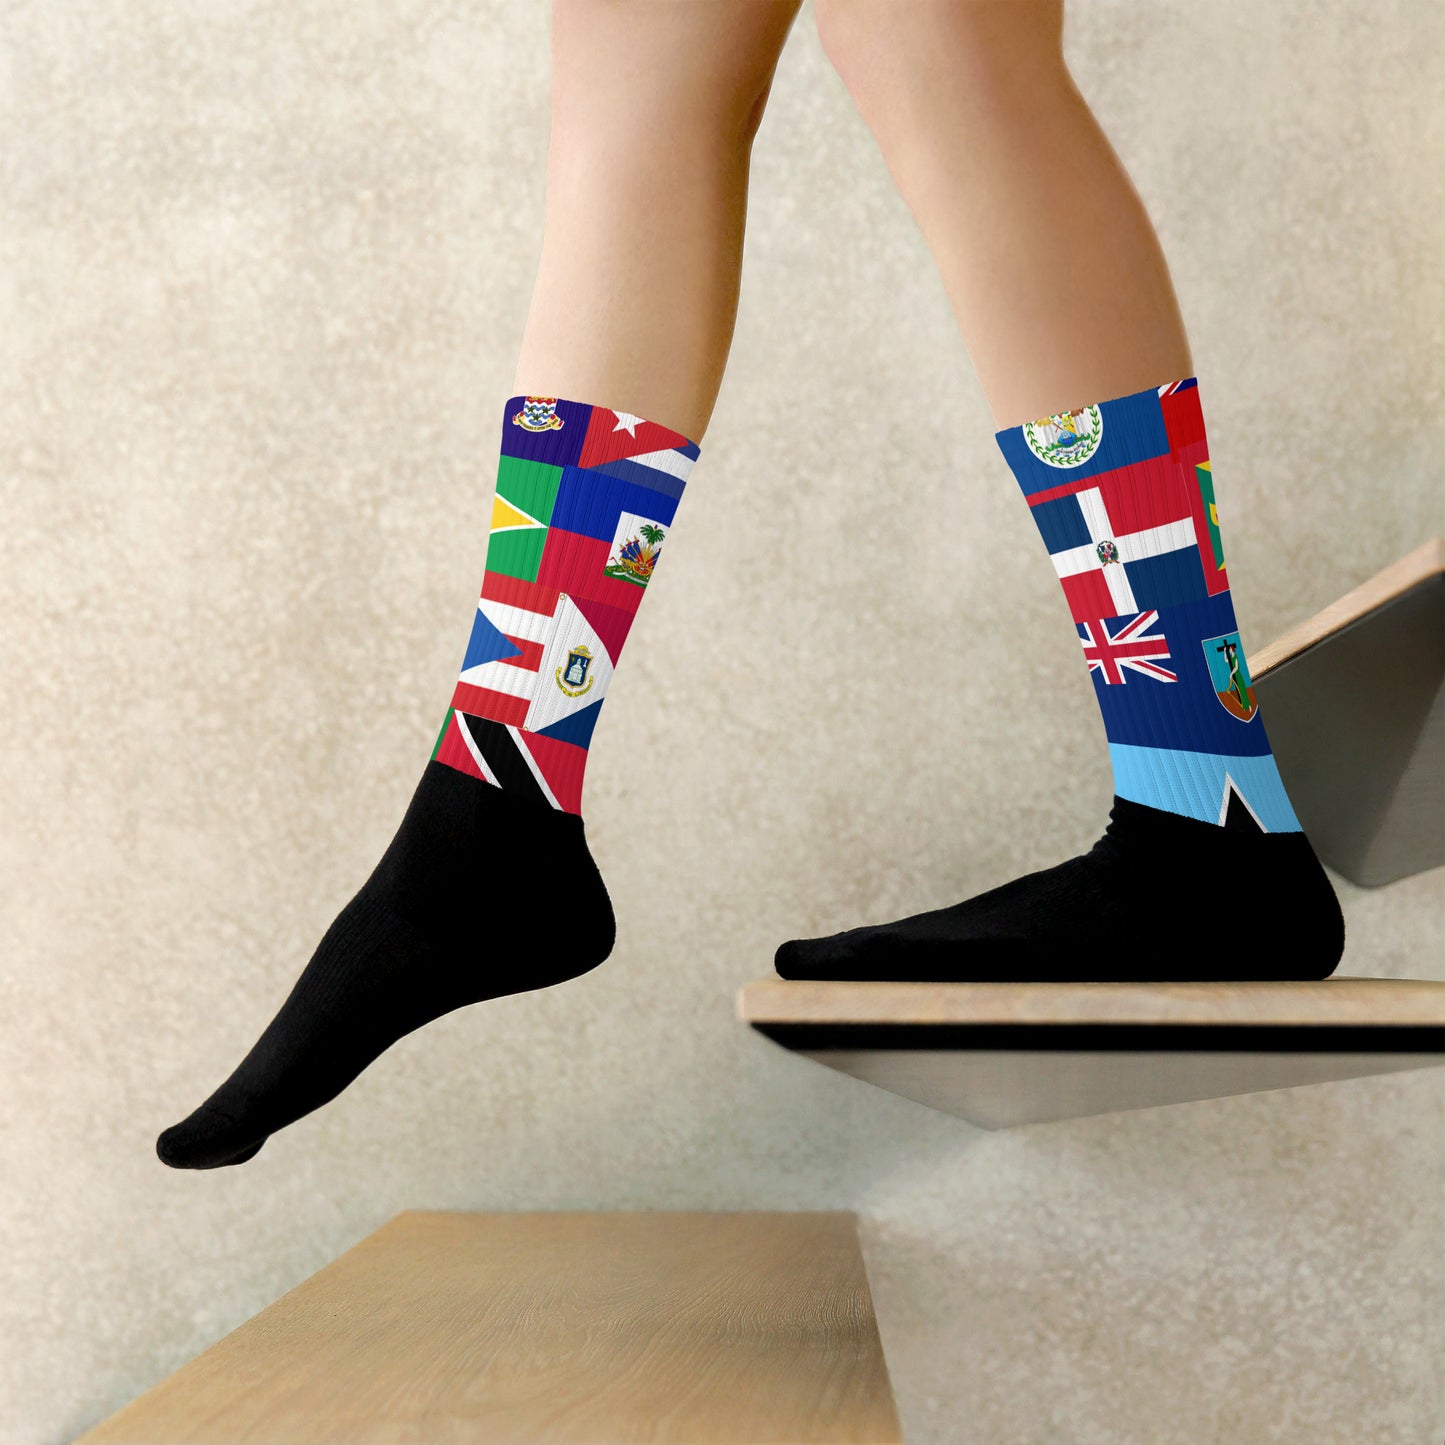 West Indian Flags Socks